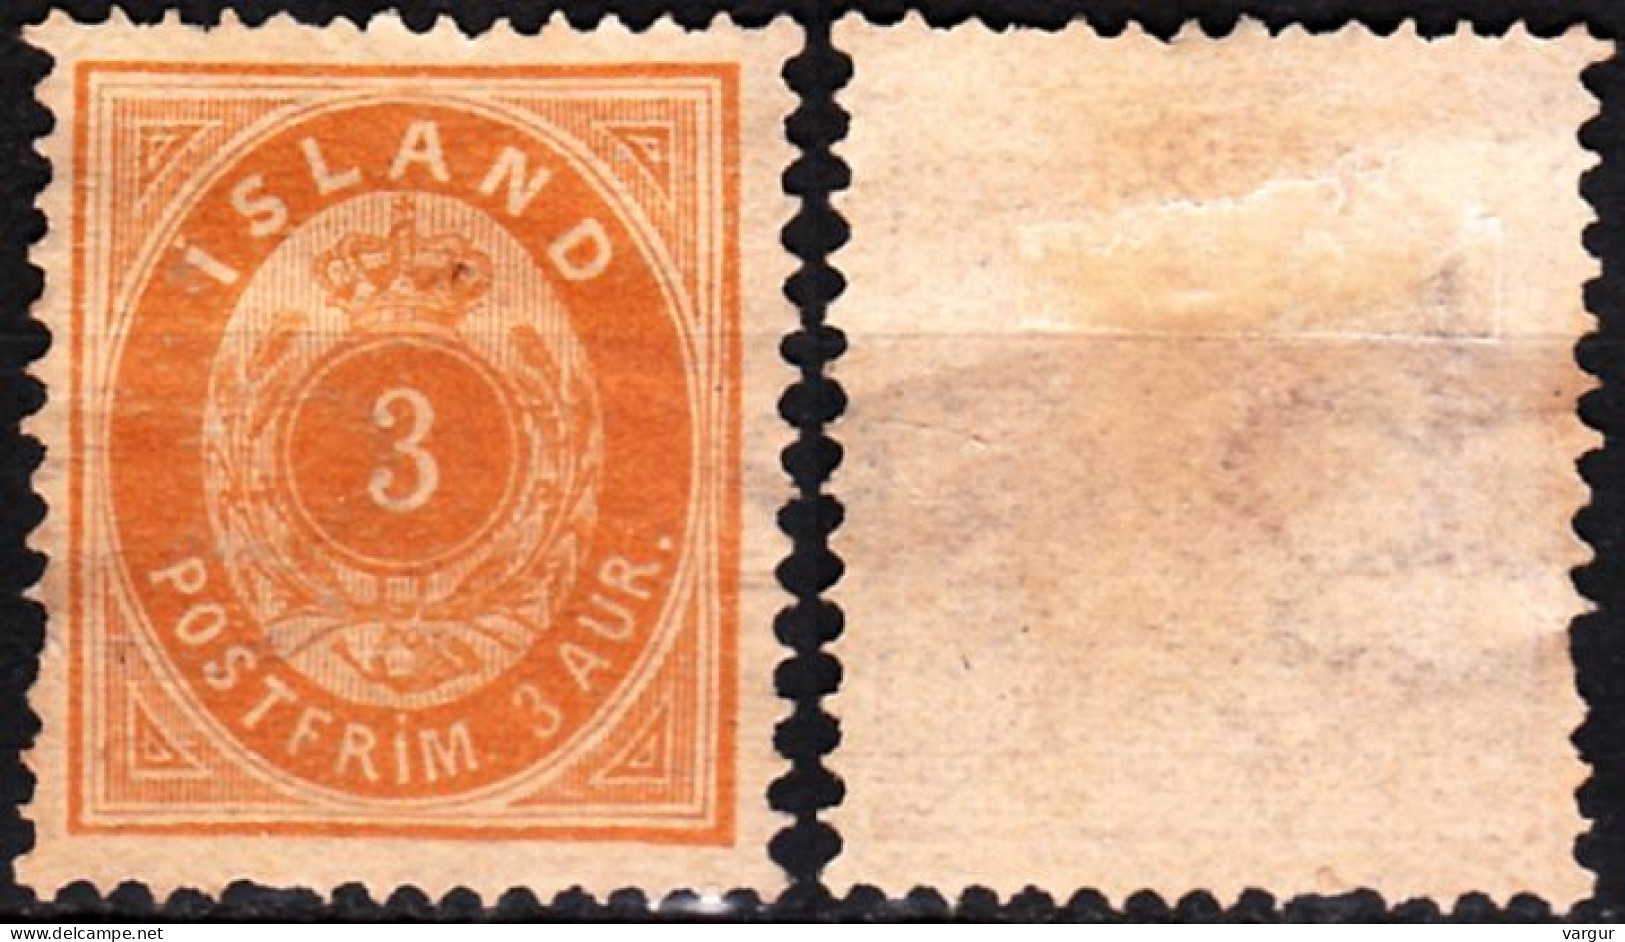 ICELAND / ISLAND 1901 Figure In Oval. 3A Large 3, MH No Gum - Ongebruikt